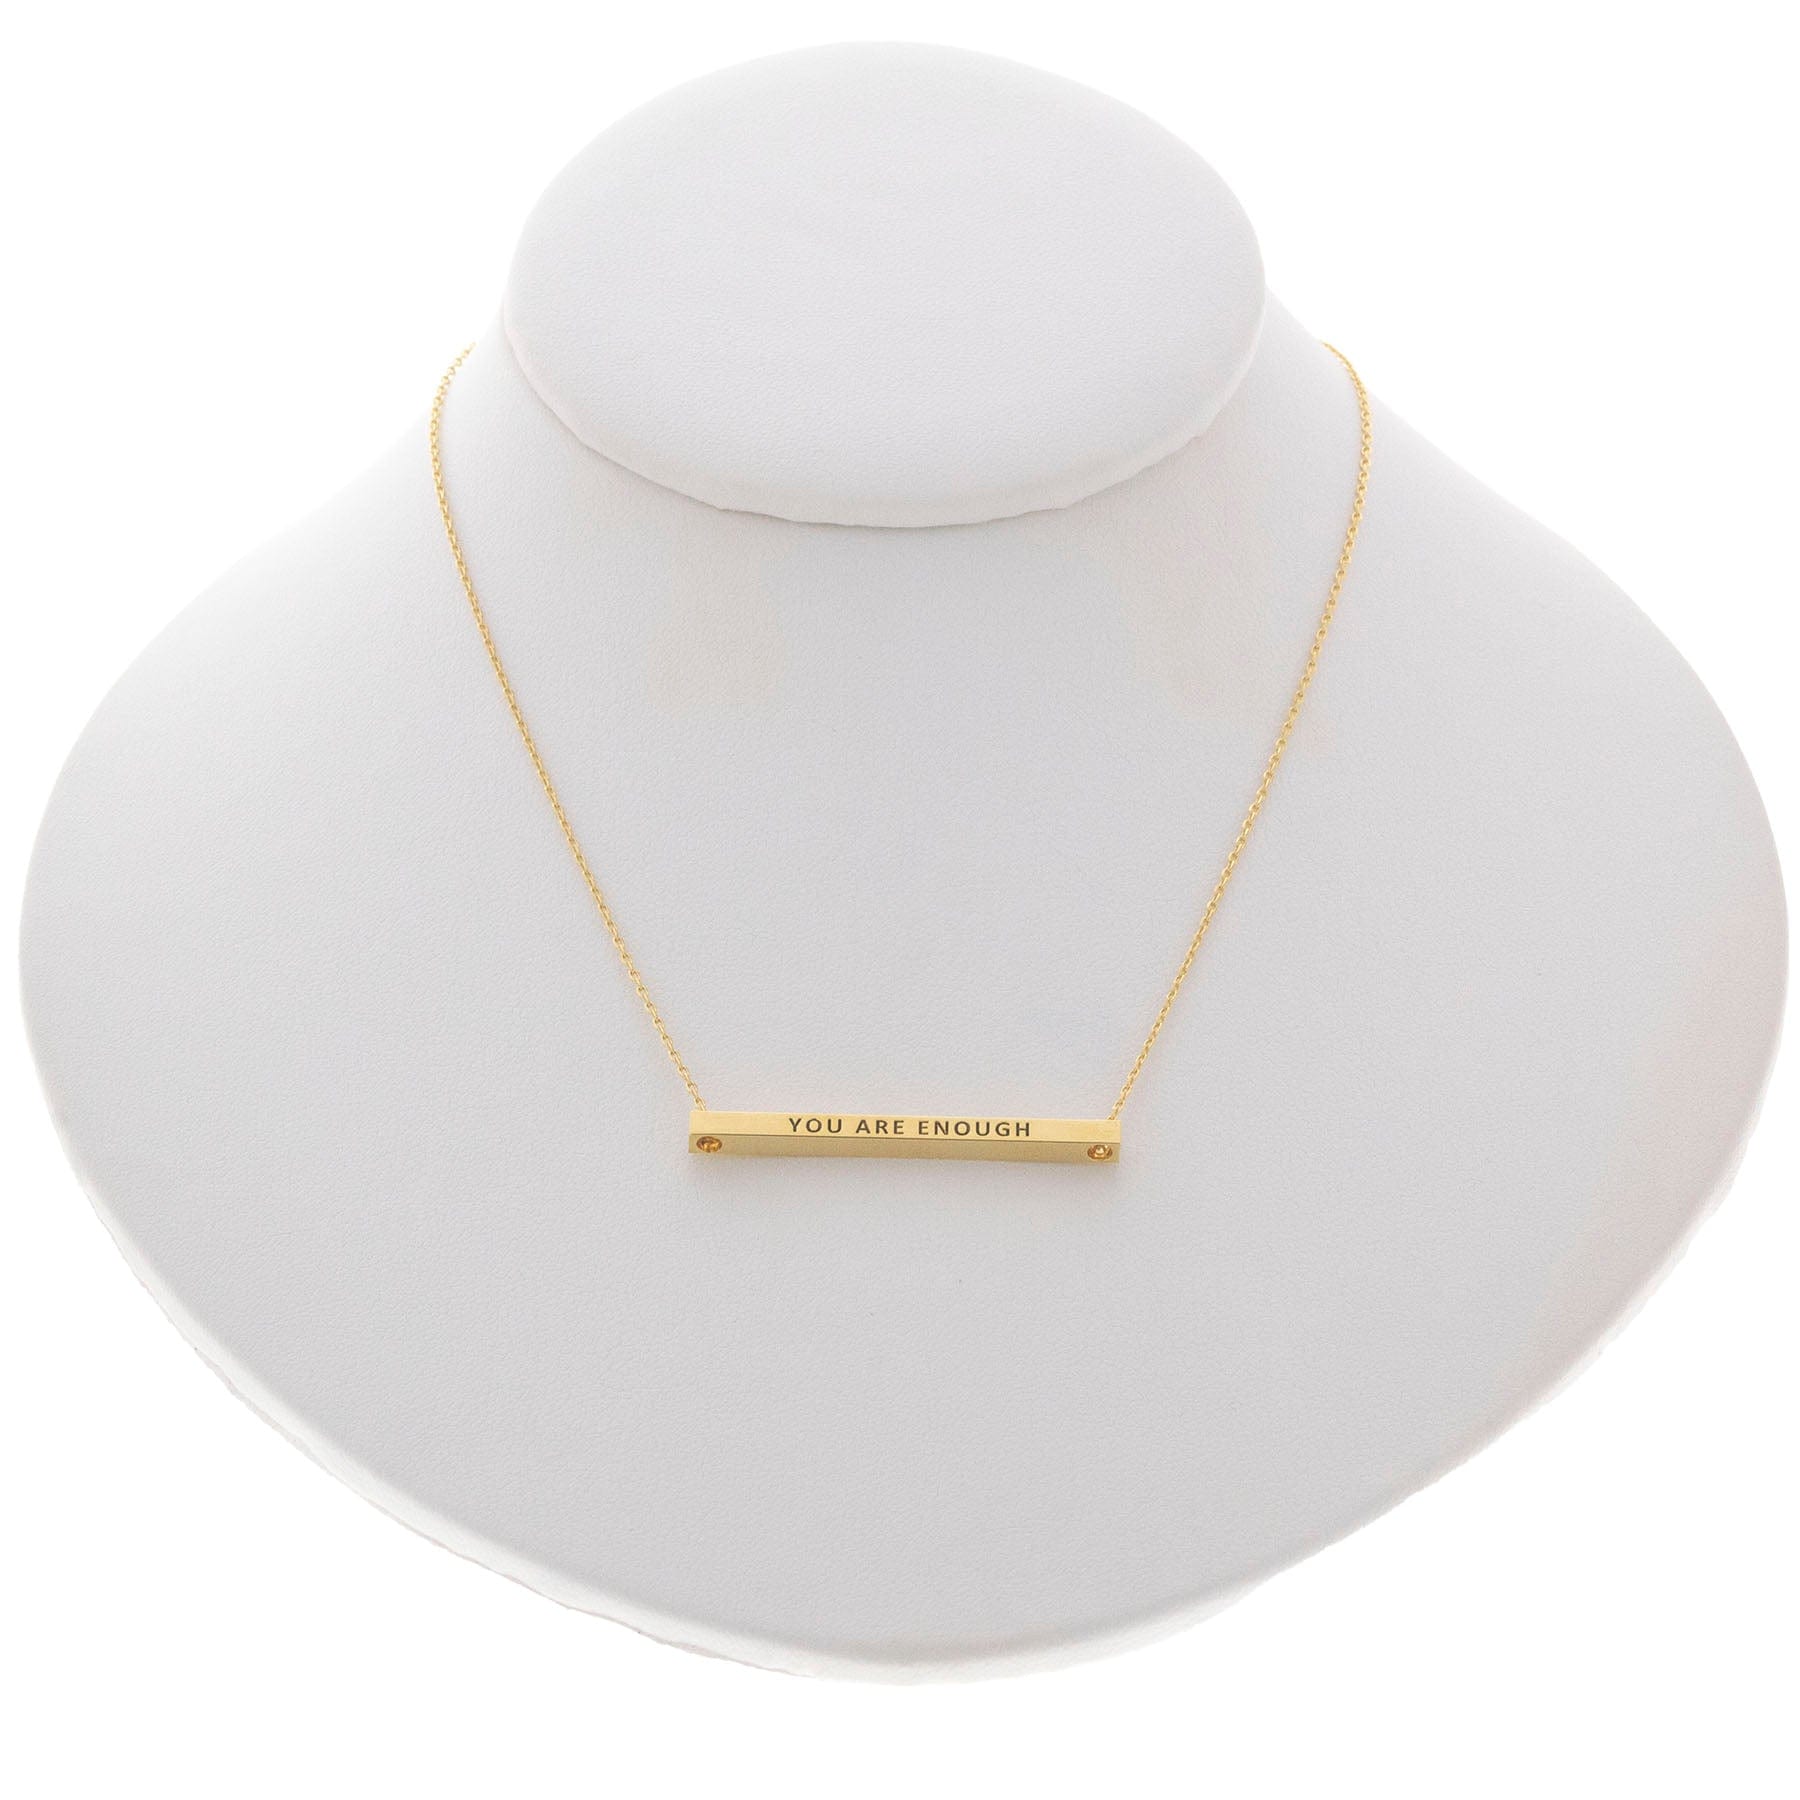 You Are Enough Bar Necklace Horizontal Style by Recovery Matters Gold